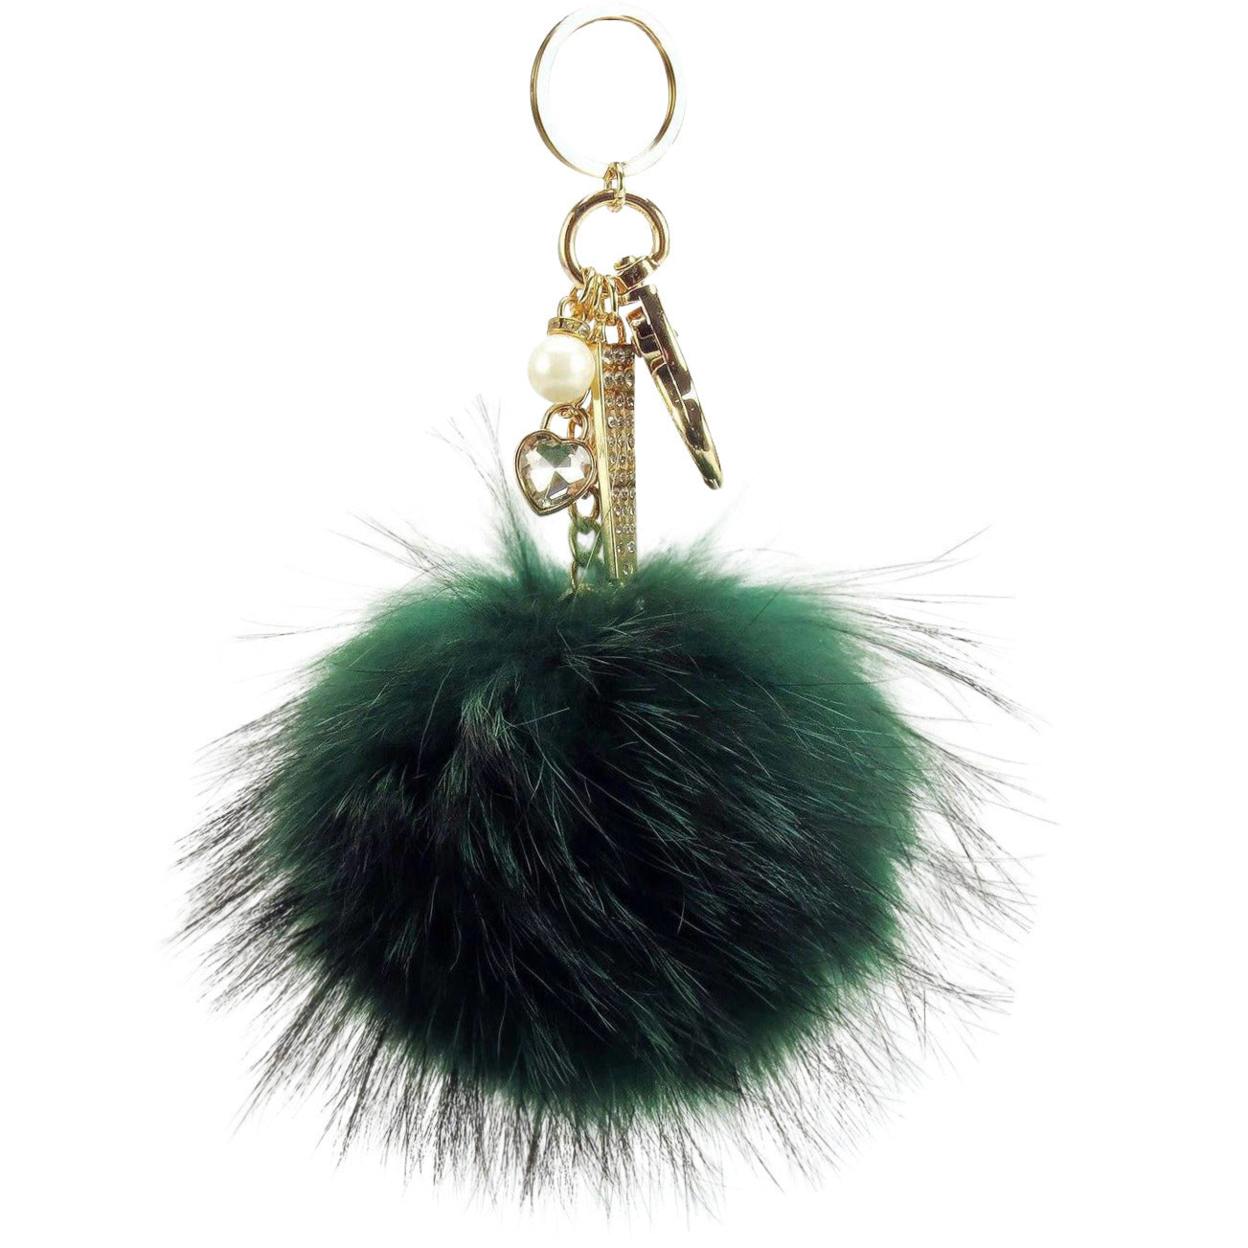 Real Fur Puff Ball Pom-Pom 6 Accessory Dangle Purse Charm - Fern Green With Gold Hardware